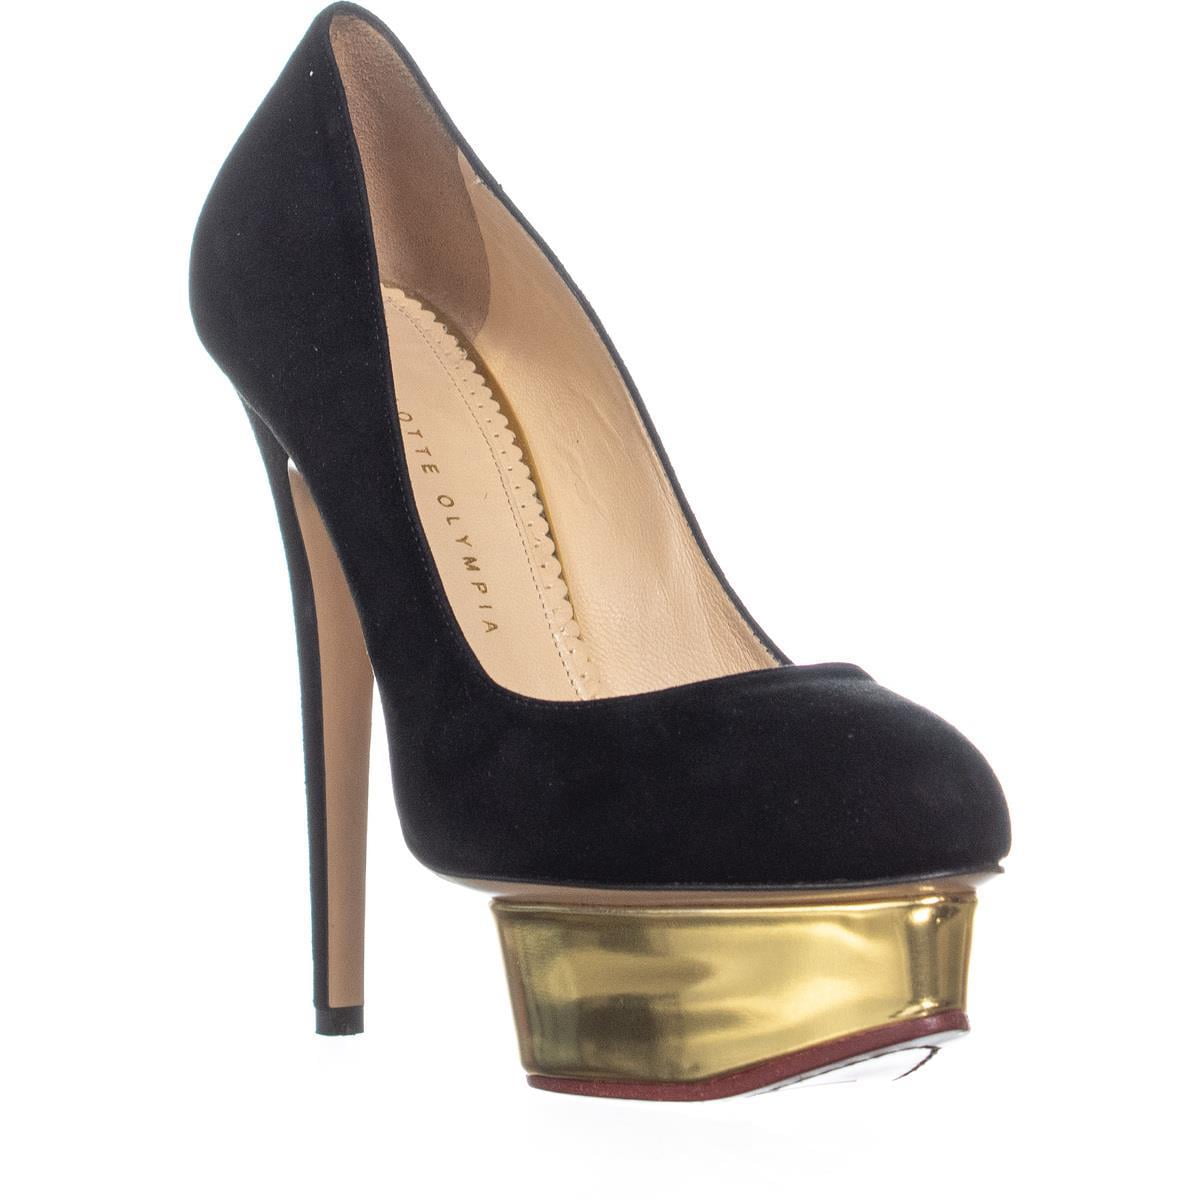 charlotte olympia dolly pumps